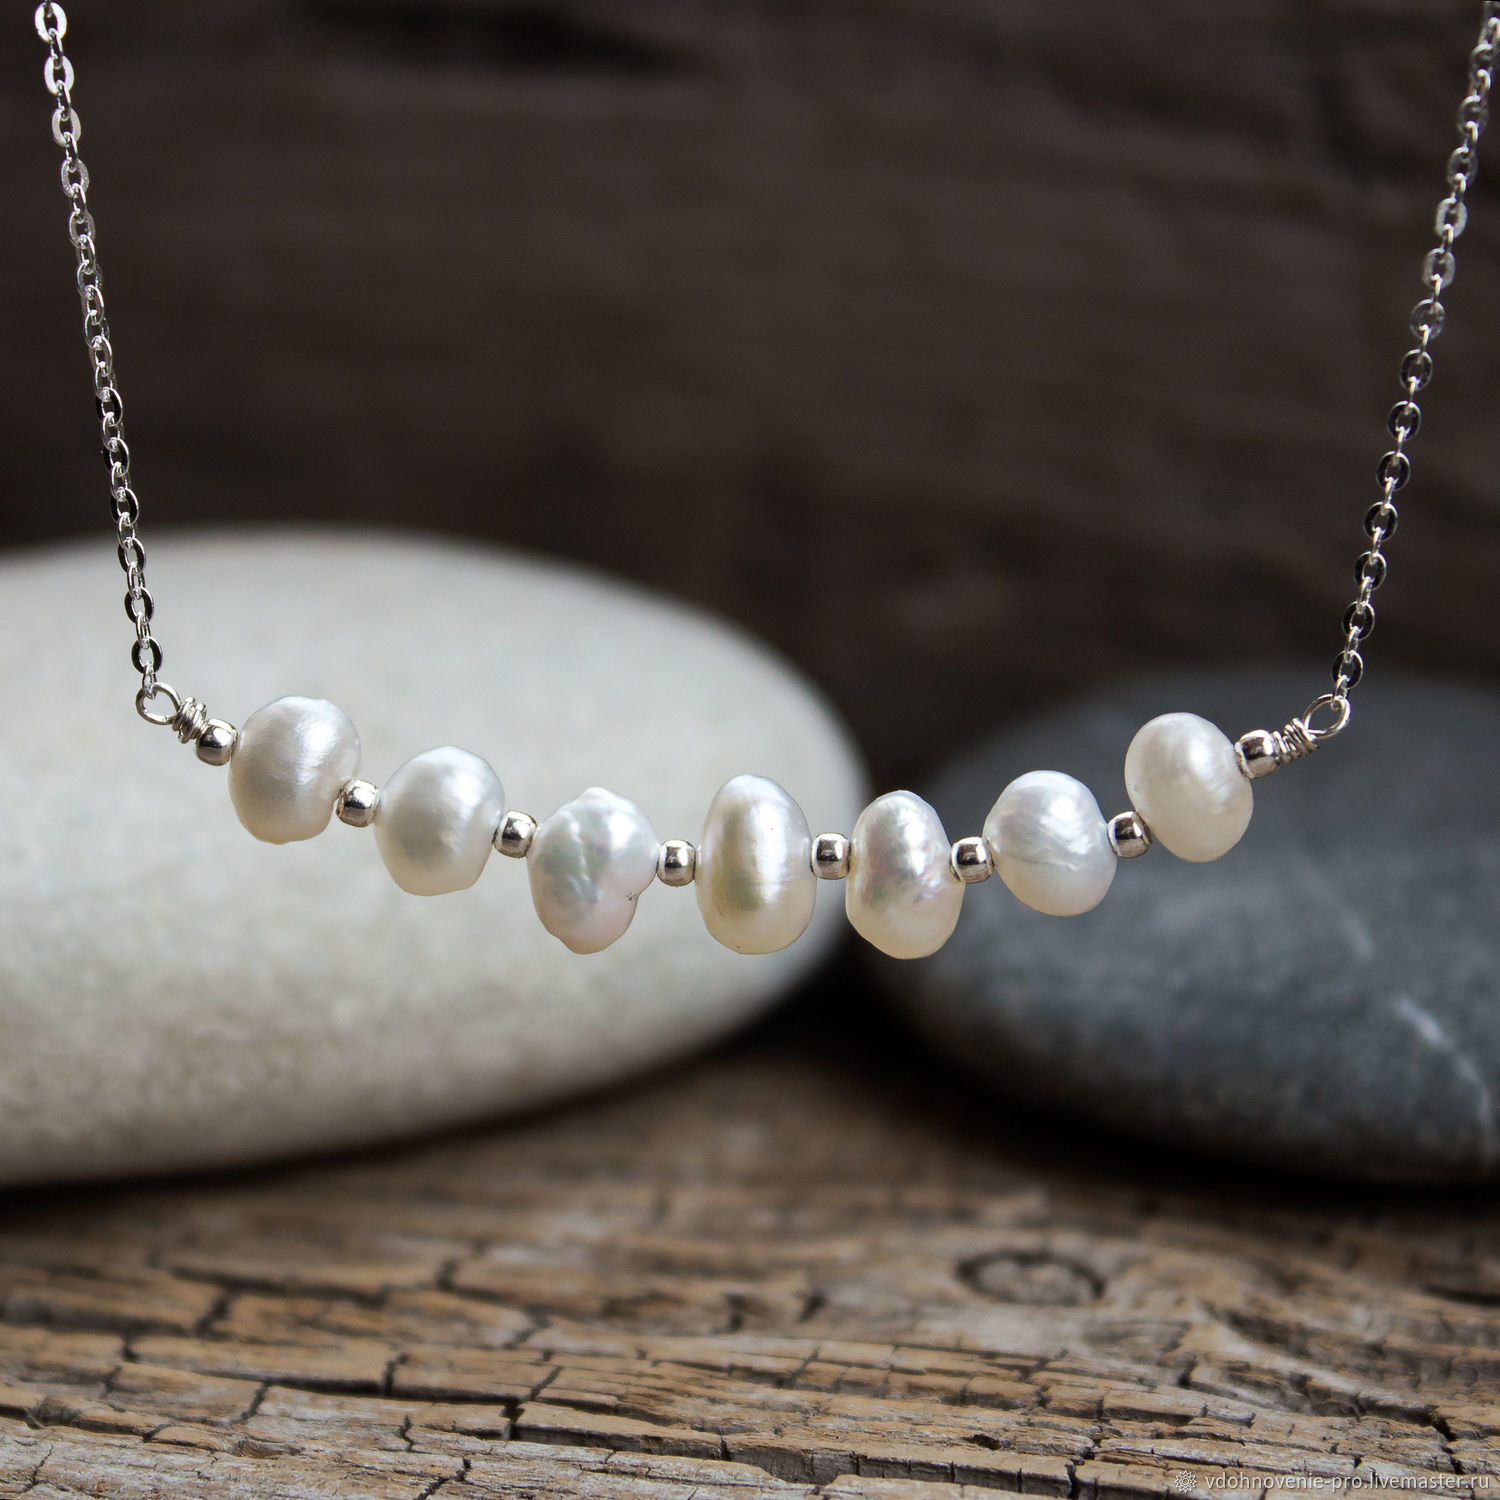 Silver mini necklace with pearls 'First snow' 925 sterling silver, Rings, Yaroslavl,  Фото №1